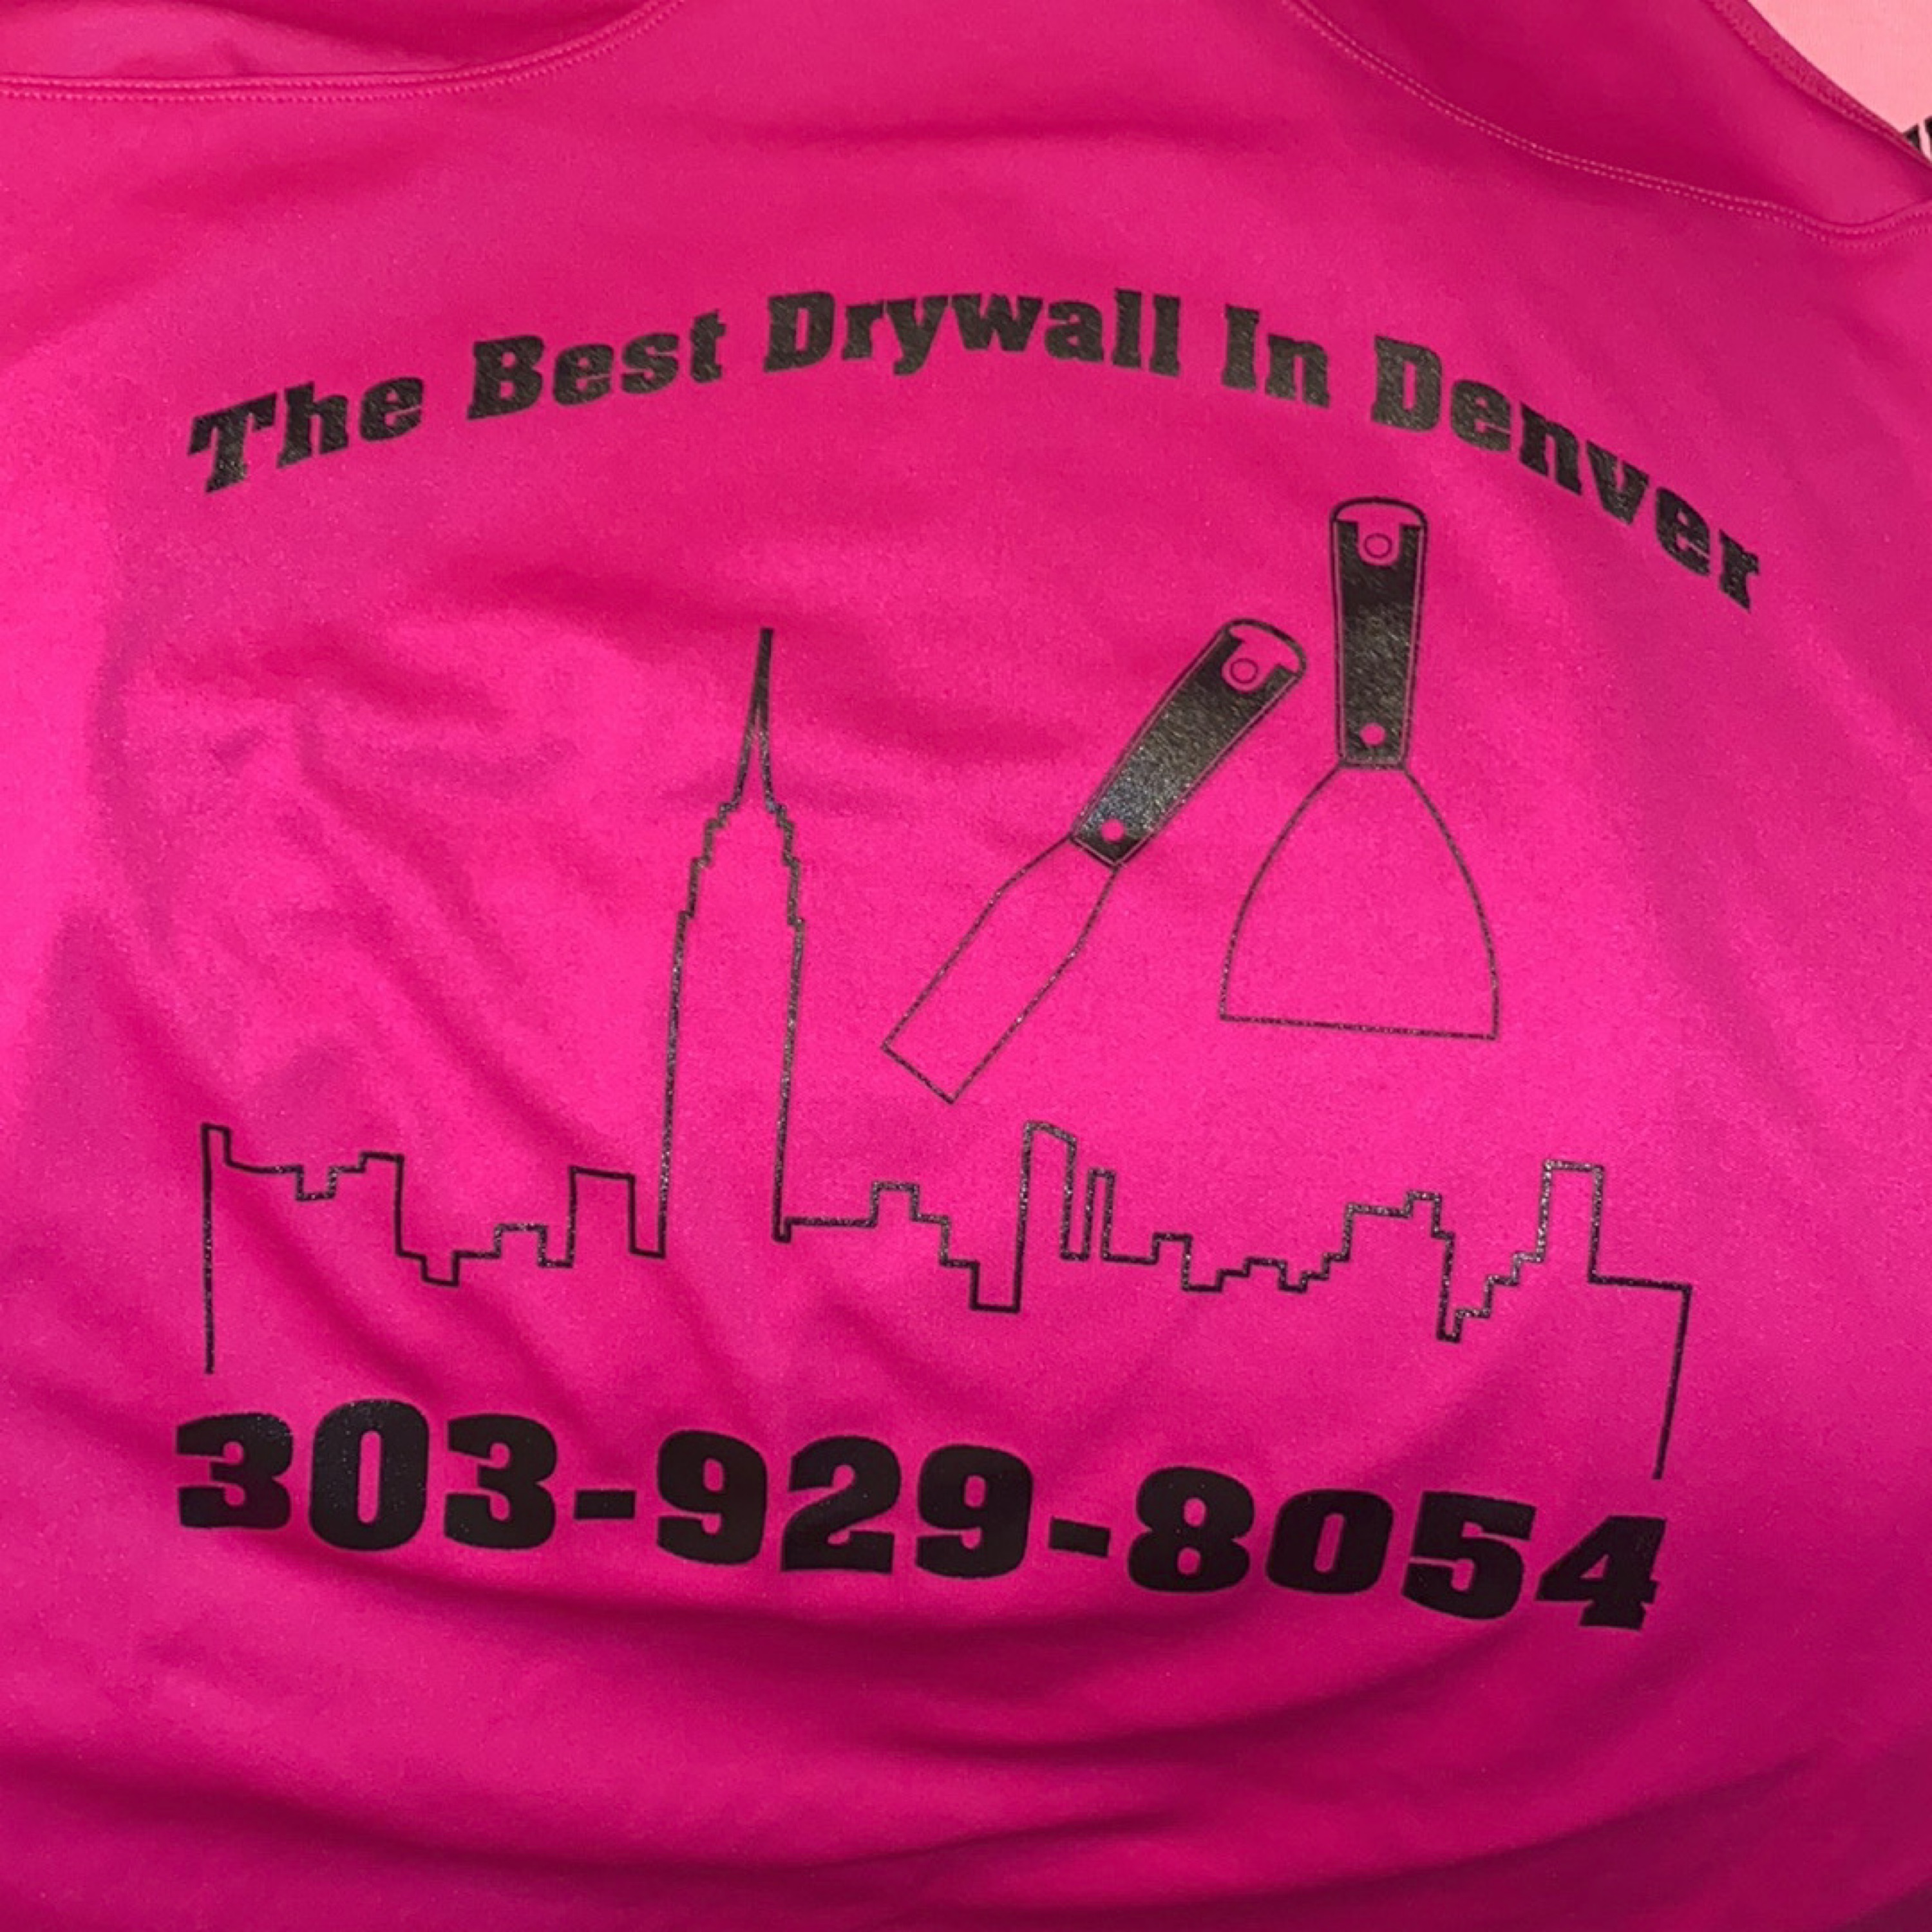 The Best Drywall Company in Denver Logo